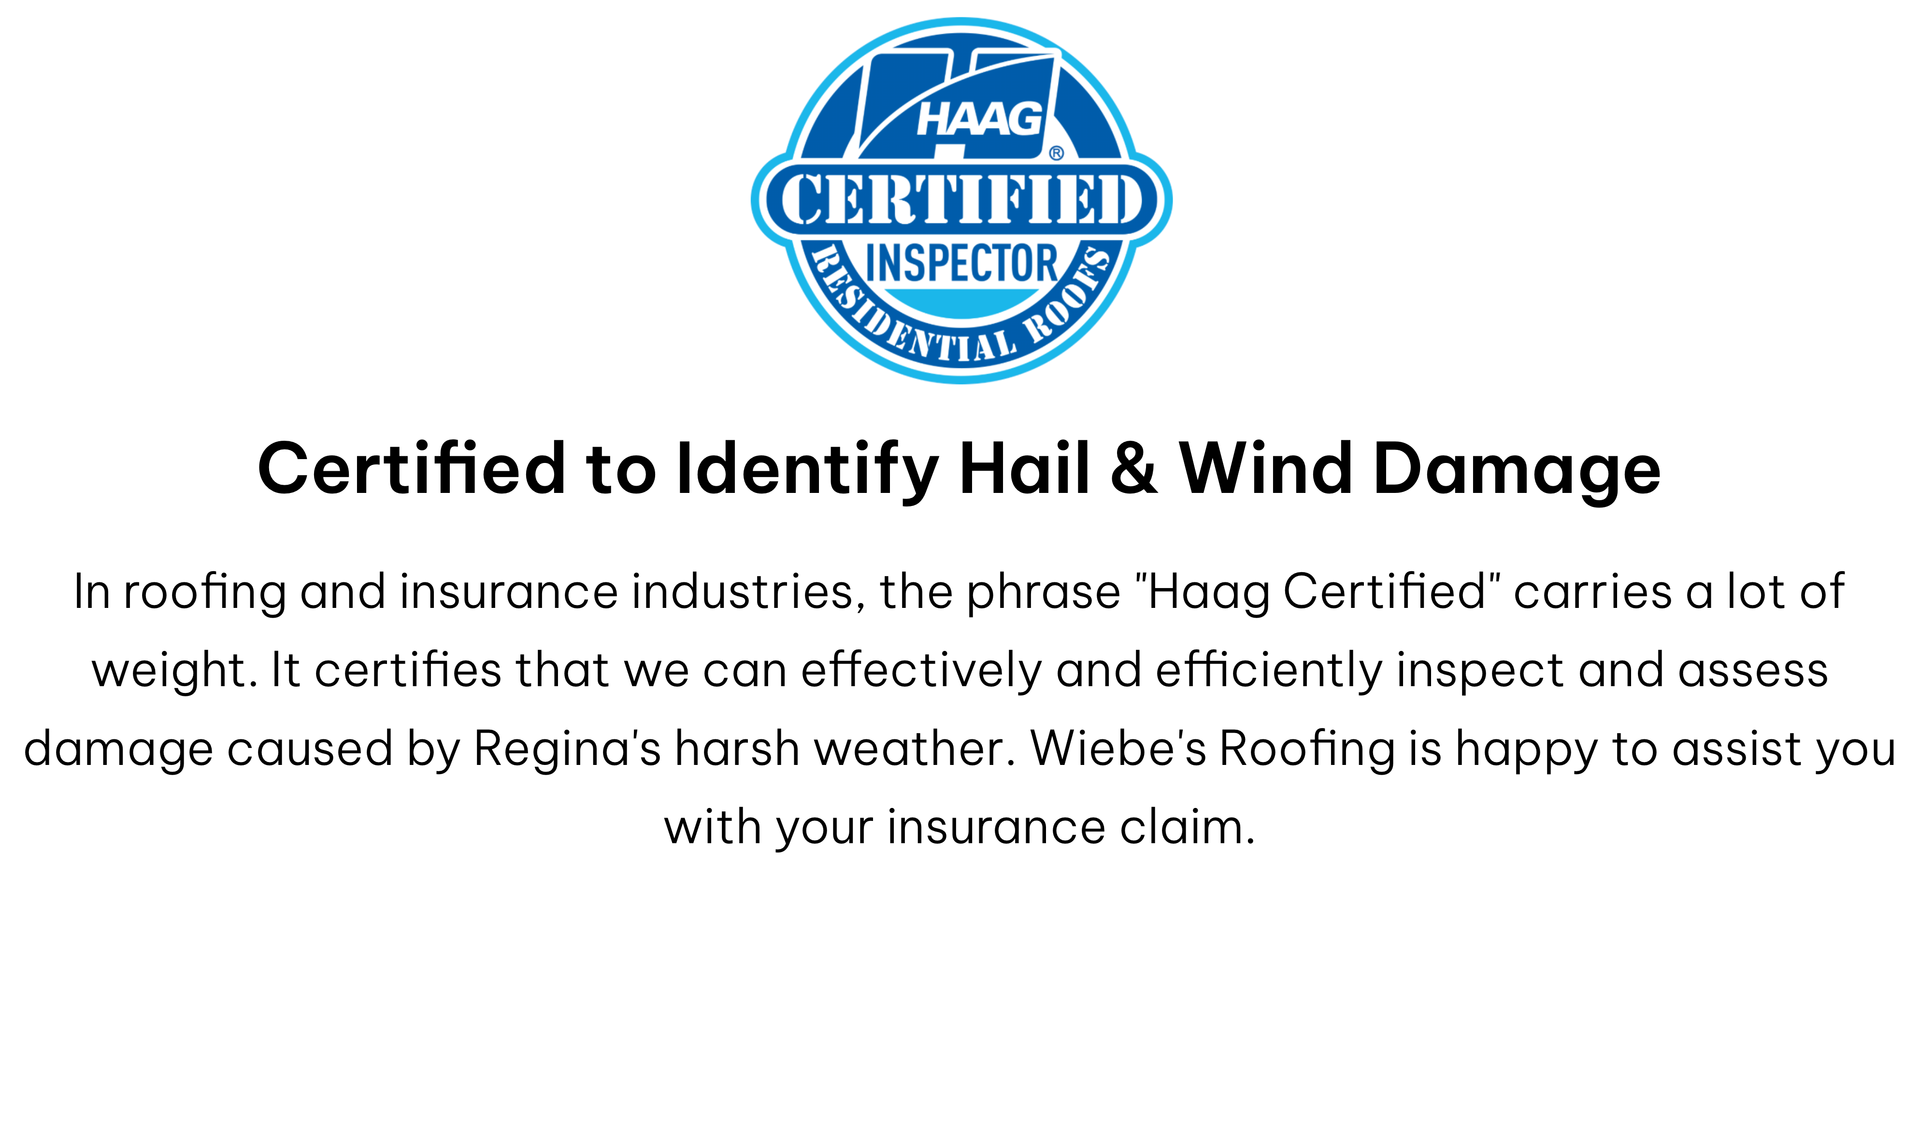 information about Wiebe's Roofing's Haag certification. filled with text and badge/logo of residential inspector certification 